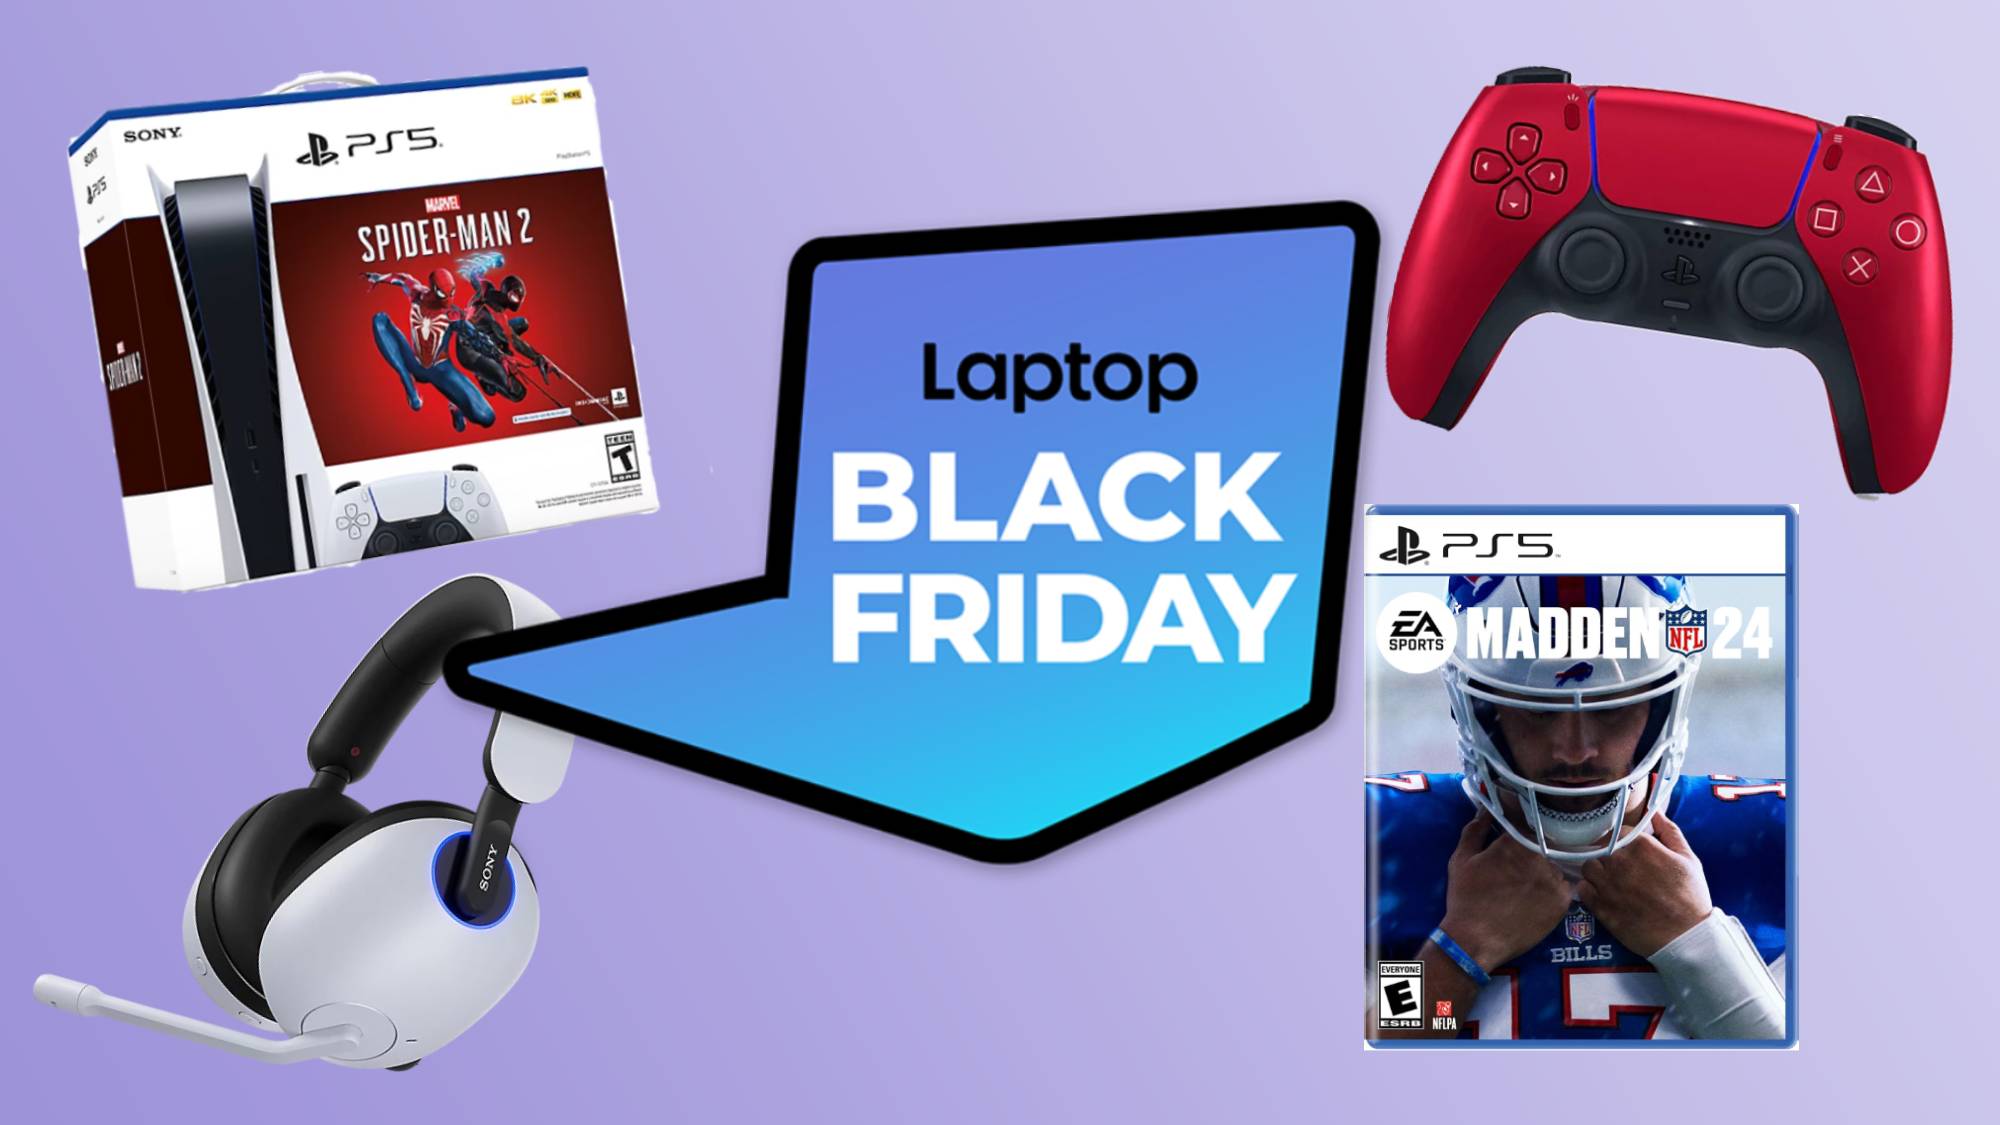 Best Black Friday PS5 SSD deals in 2023 - Video Games on Sports Illustrated